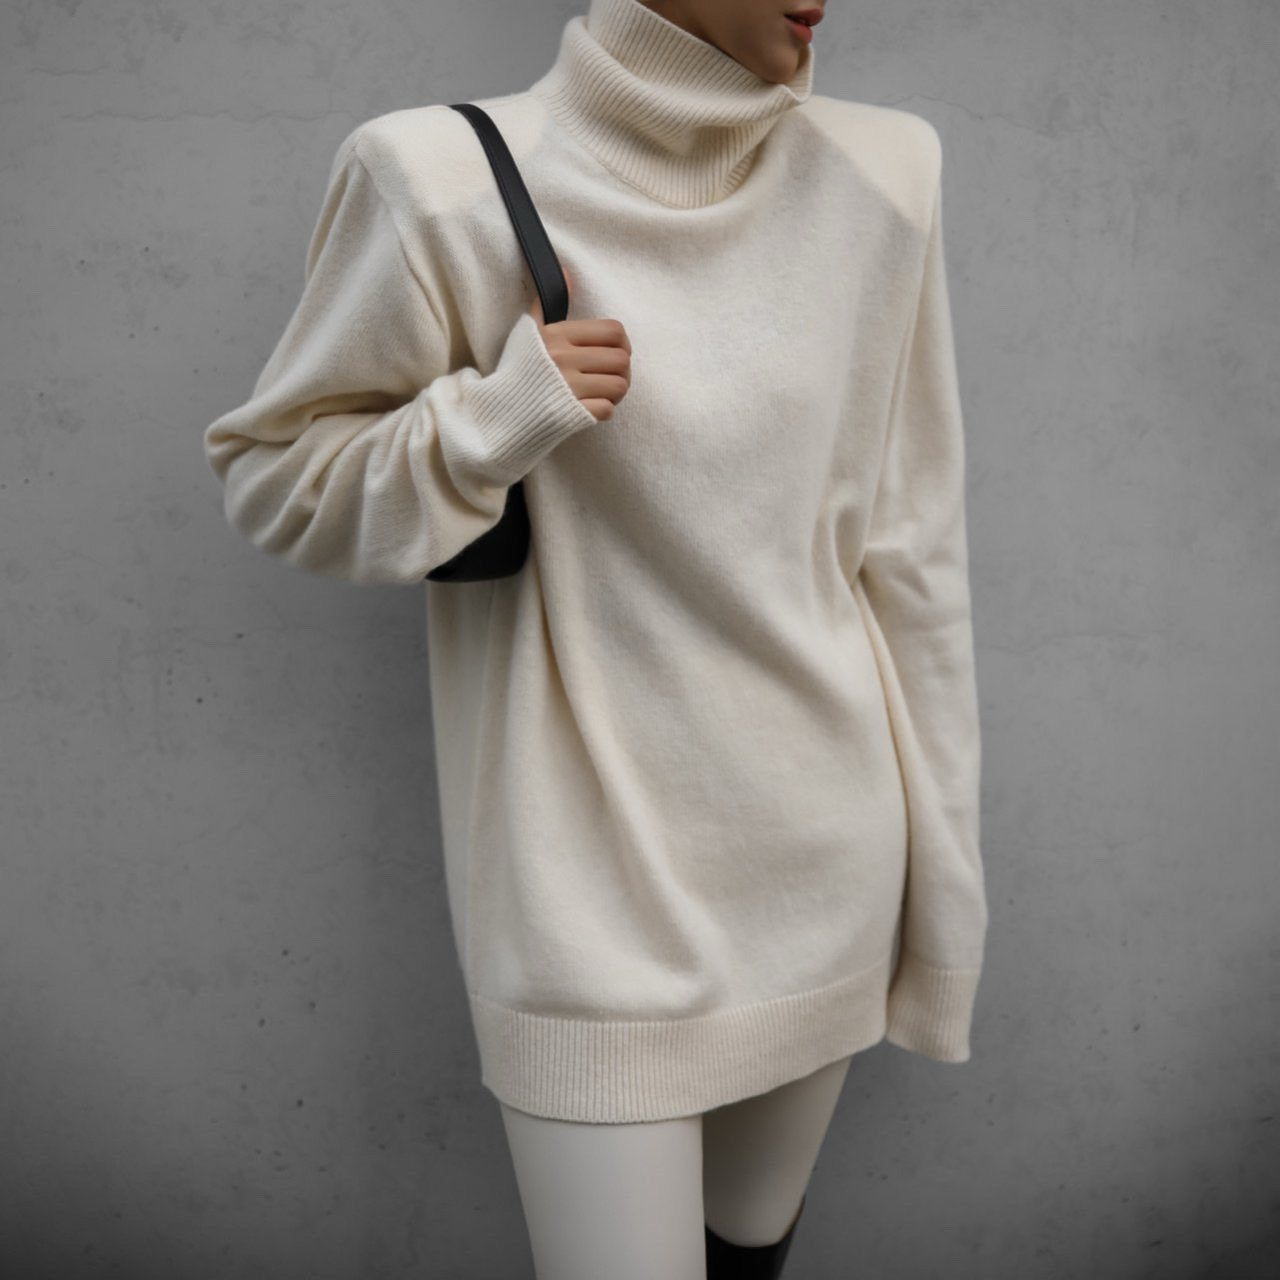 [Ready to ship] [PAPERMOON] AW / Cashmere Padded Shoulder Turtleneck Mini Dress